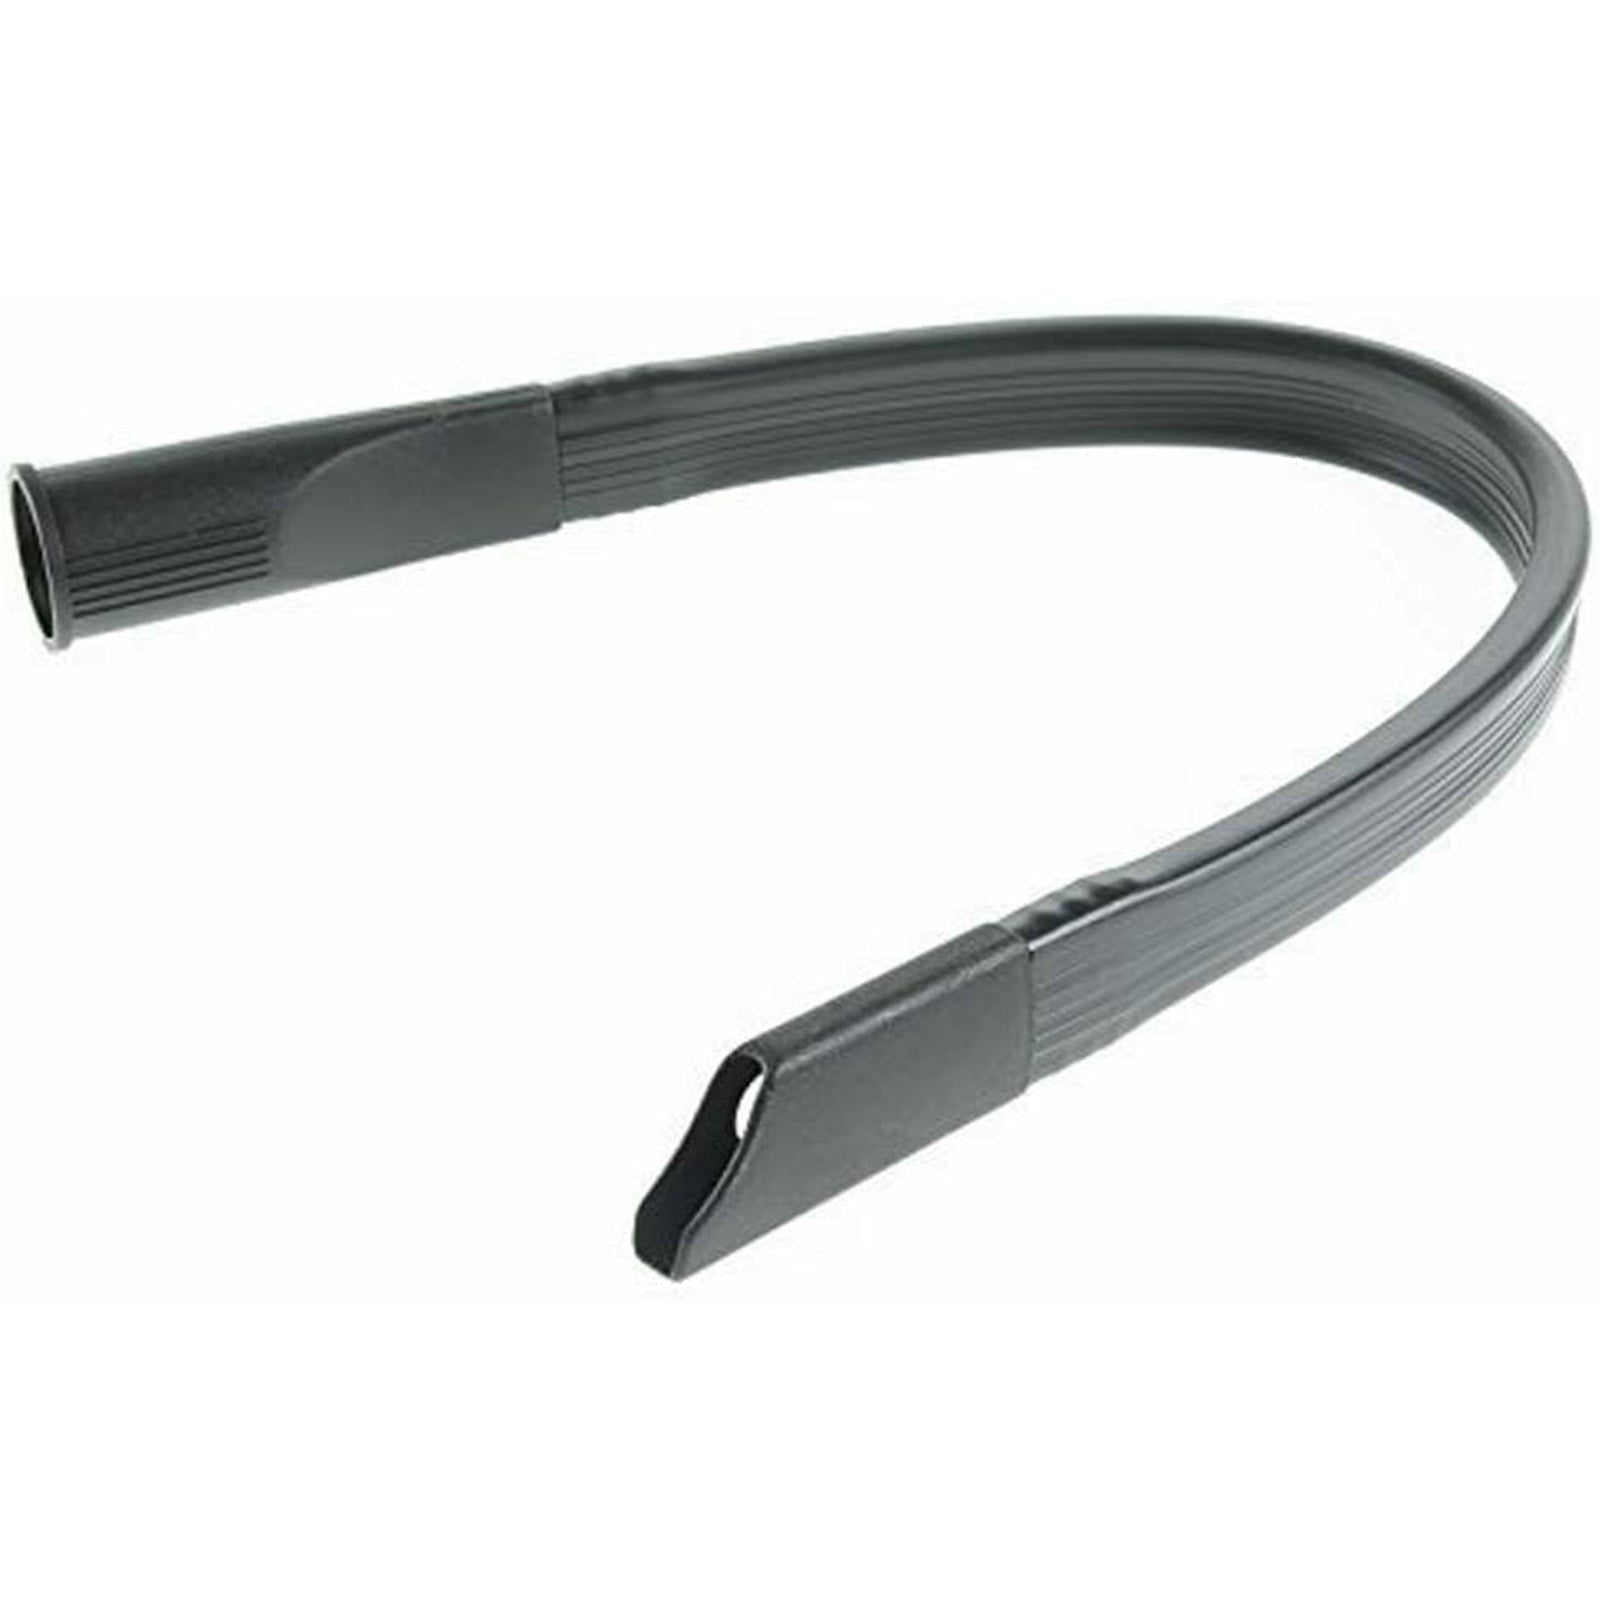 Flexible Crevice Tool Extra Long compatible with SAMSUNG Vacuum Cleaner (32mm or 35mm)